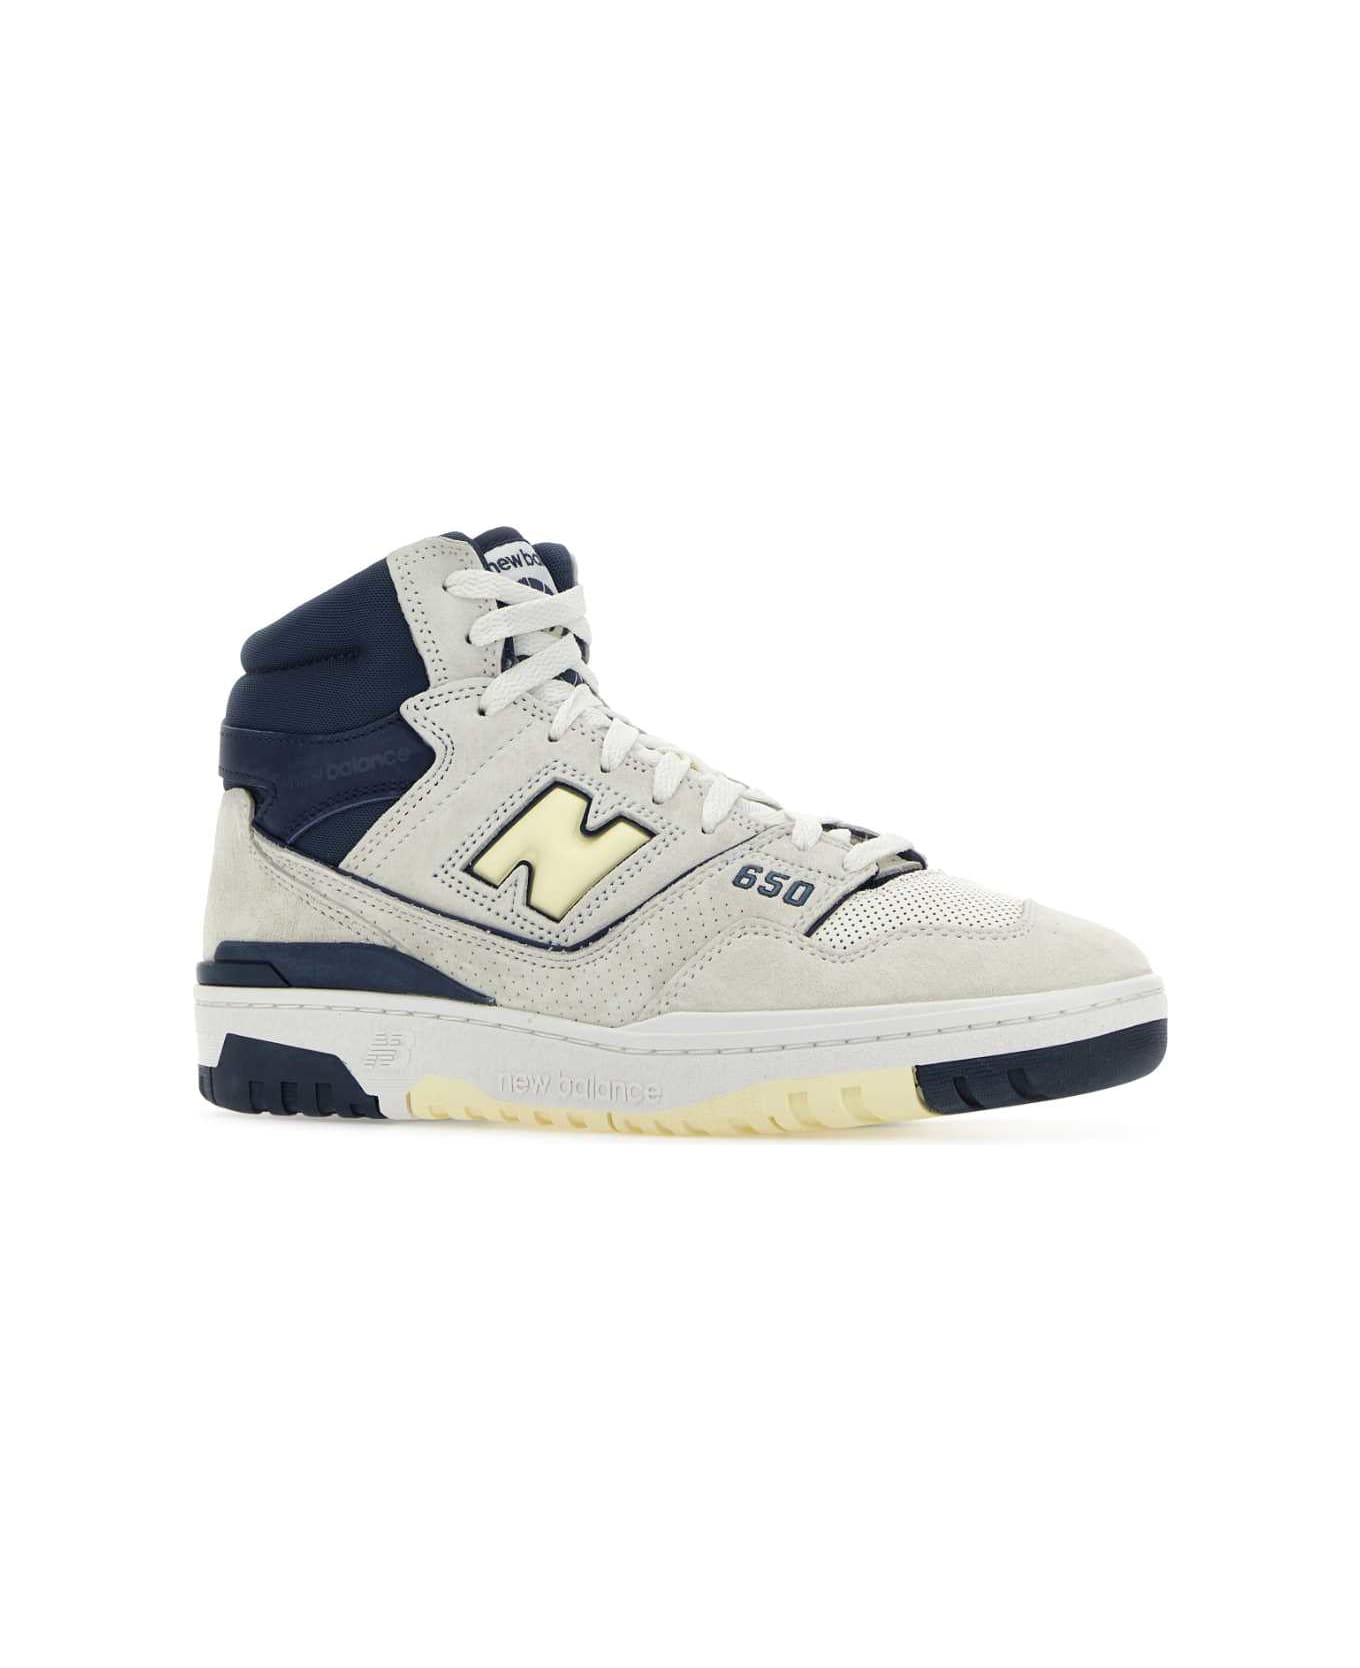 New Balance Multicolor Leather And Suede 650 Sneakers - SEASALT